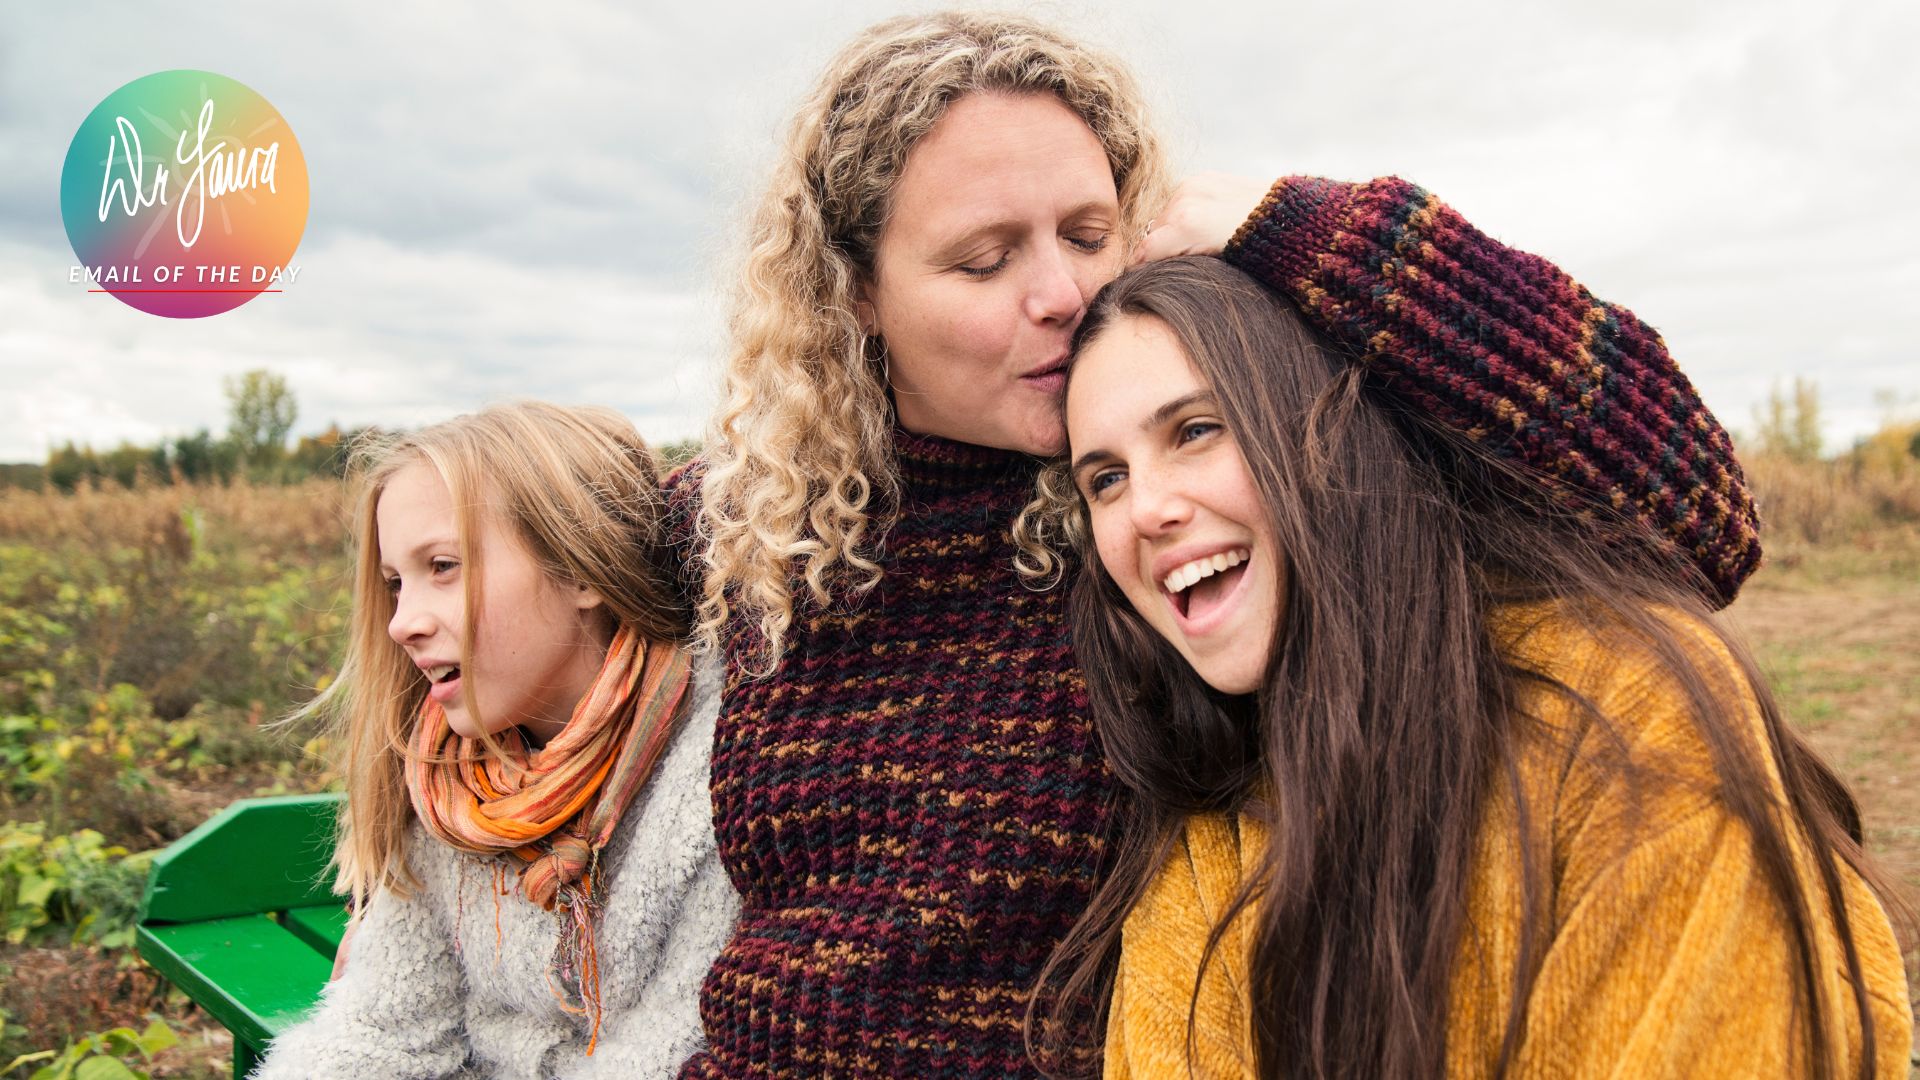 Woman in red sweater kisses the head of young female teen on her left and hugs a young girl on her right